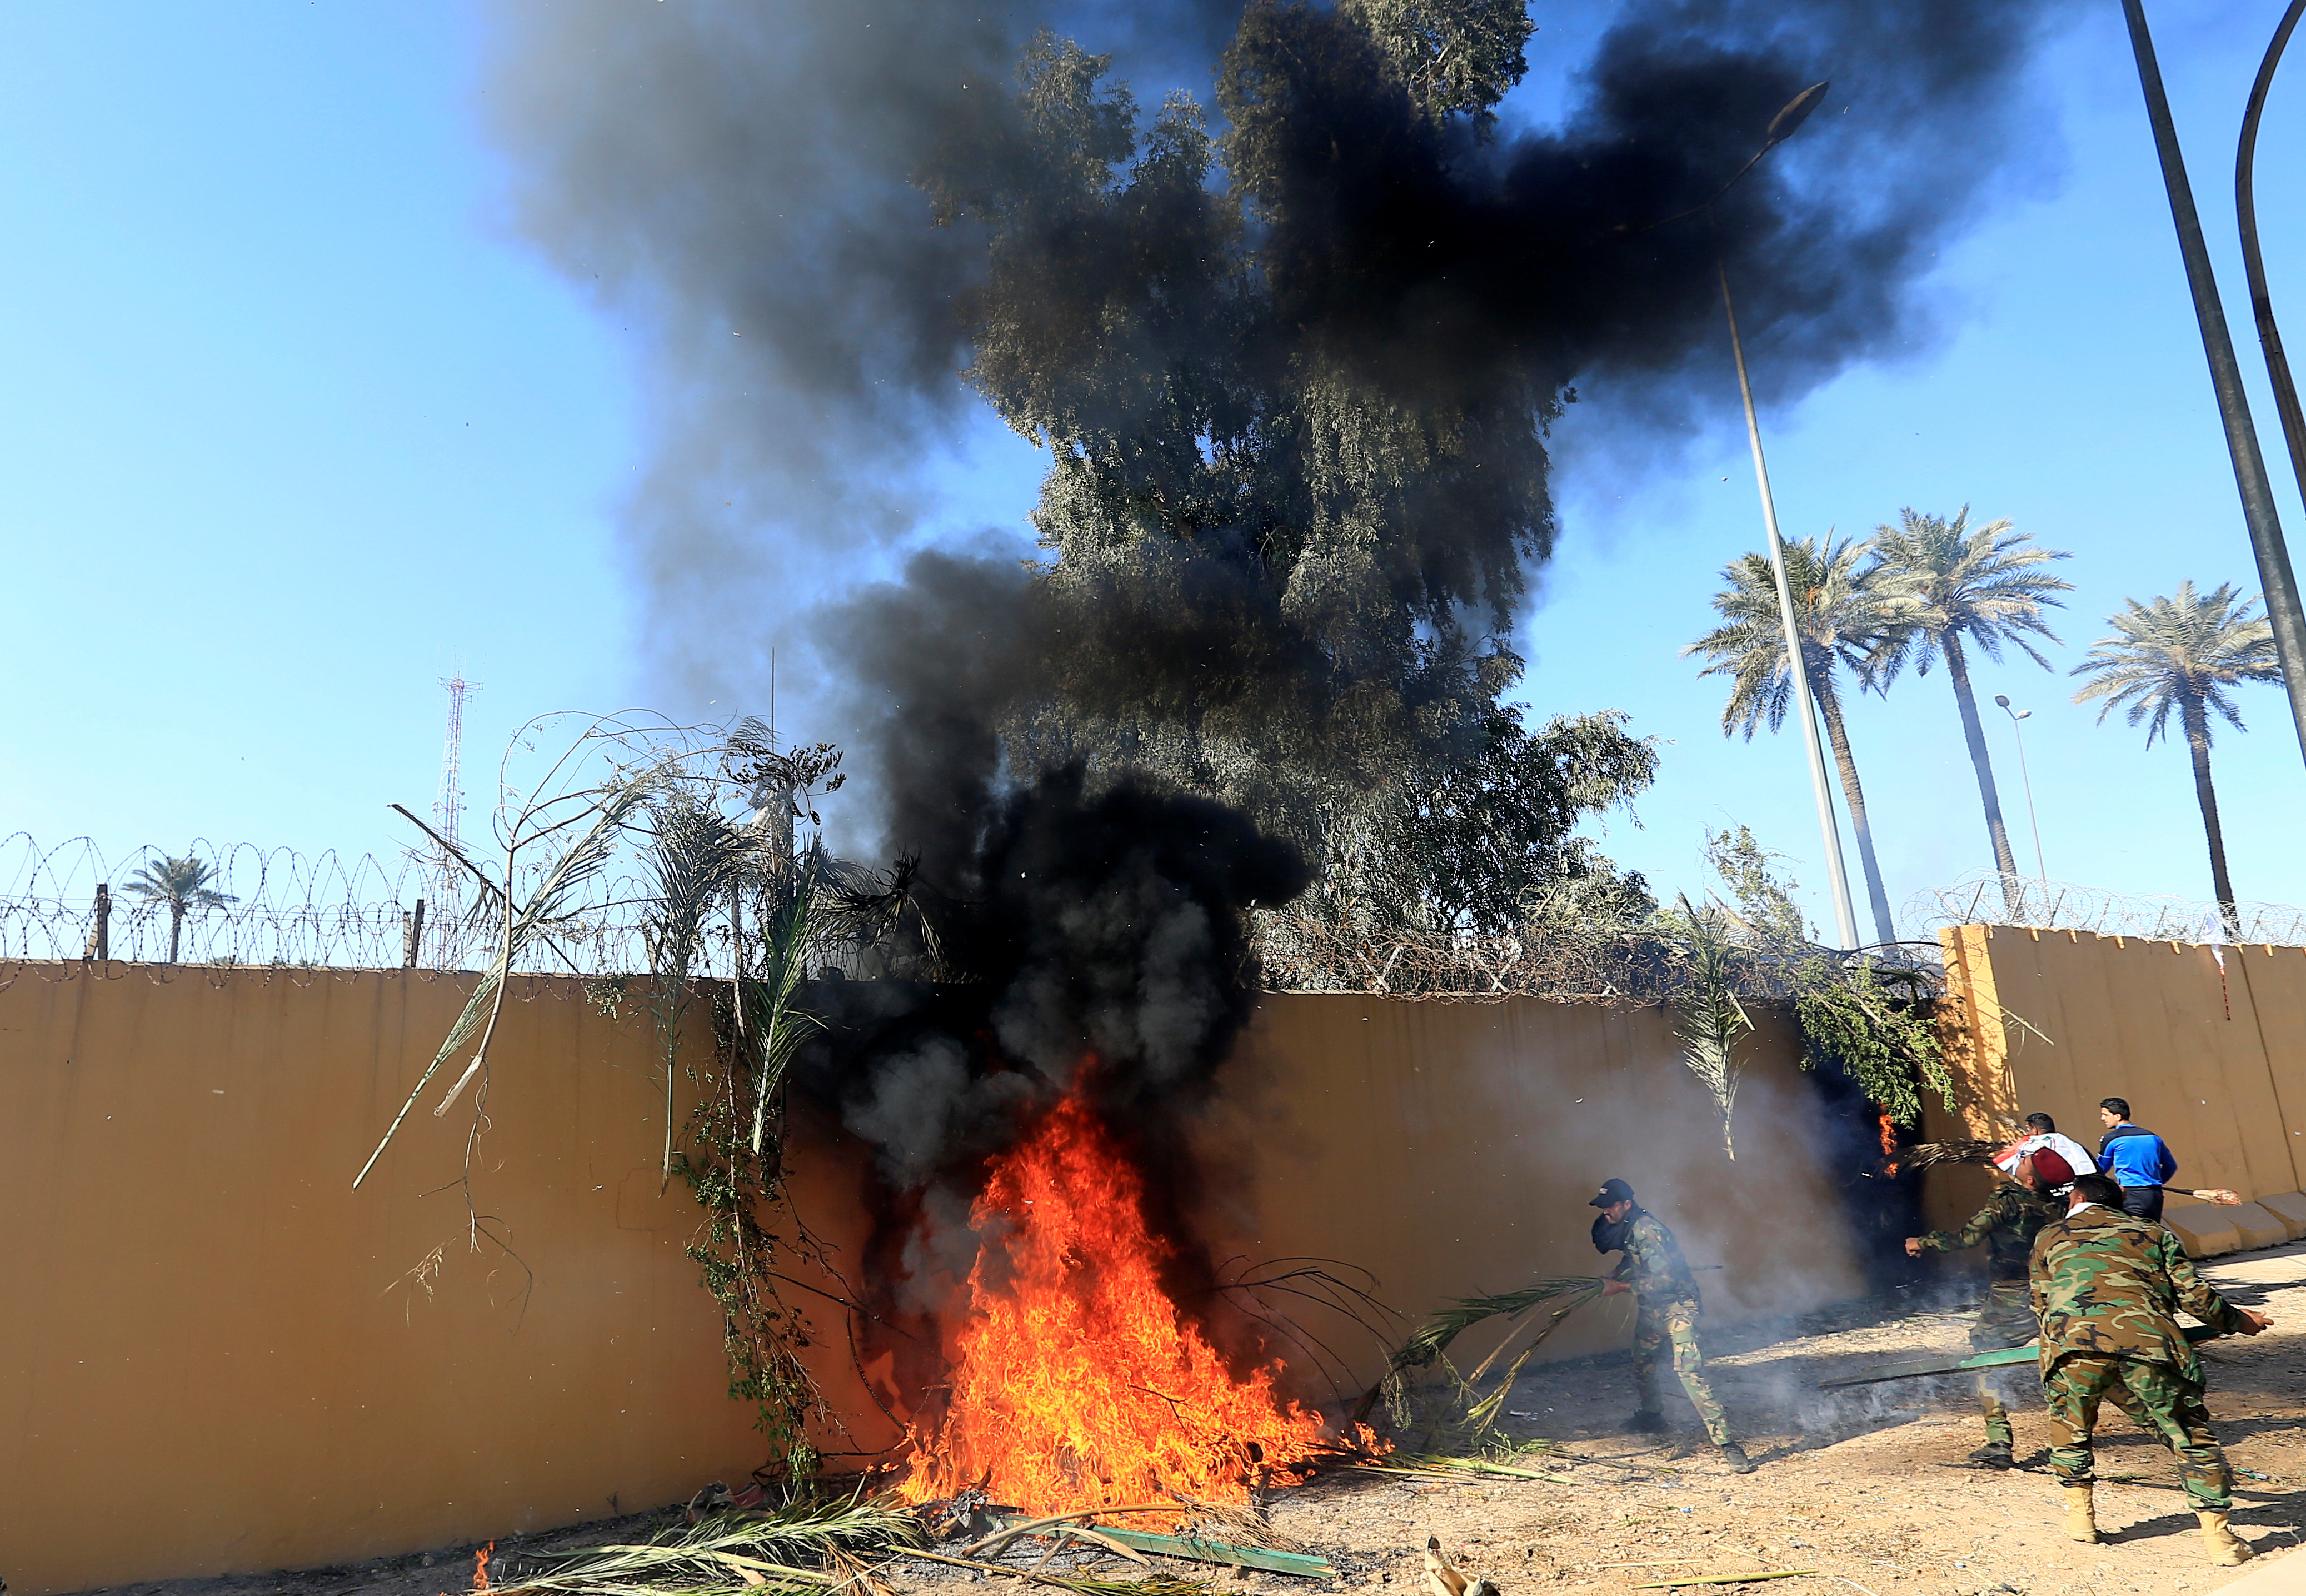 Hashd al-Shaabi (paramilitary forces) fighters set the U.S. Embassy wall on fire as they protest to condemn air strikes on their bases, in Baghdad, Iraq December 31, 2019. (REUTERS/Thaier al-Sudani)